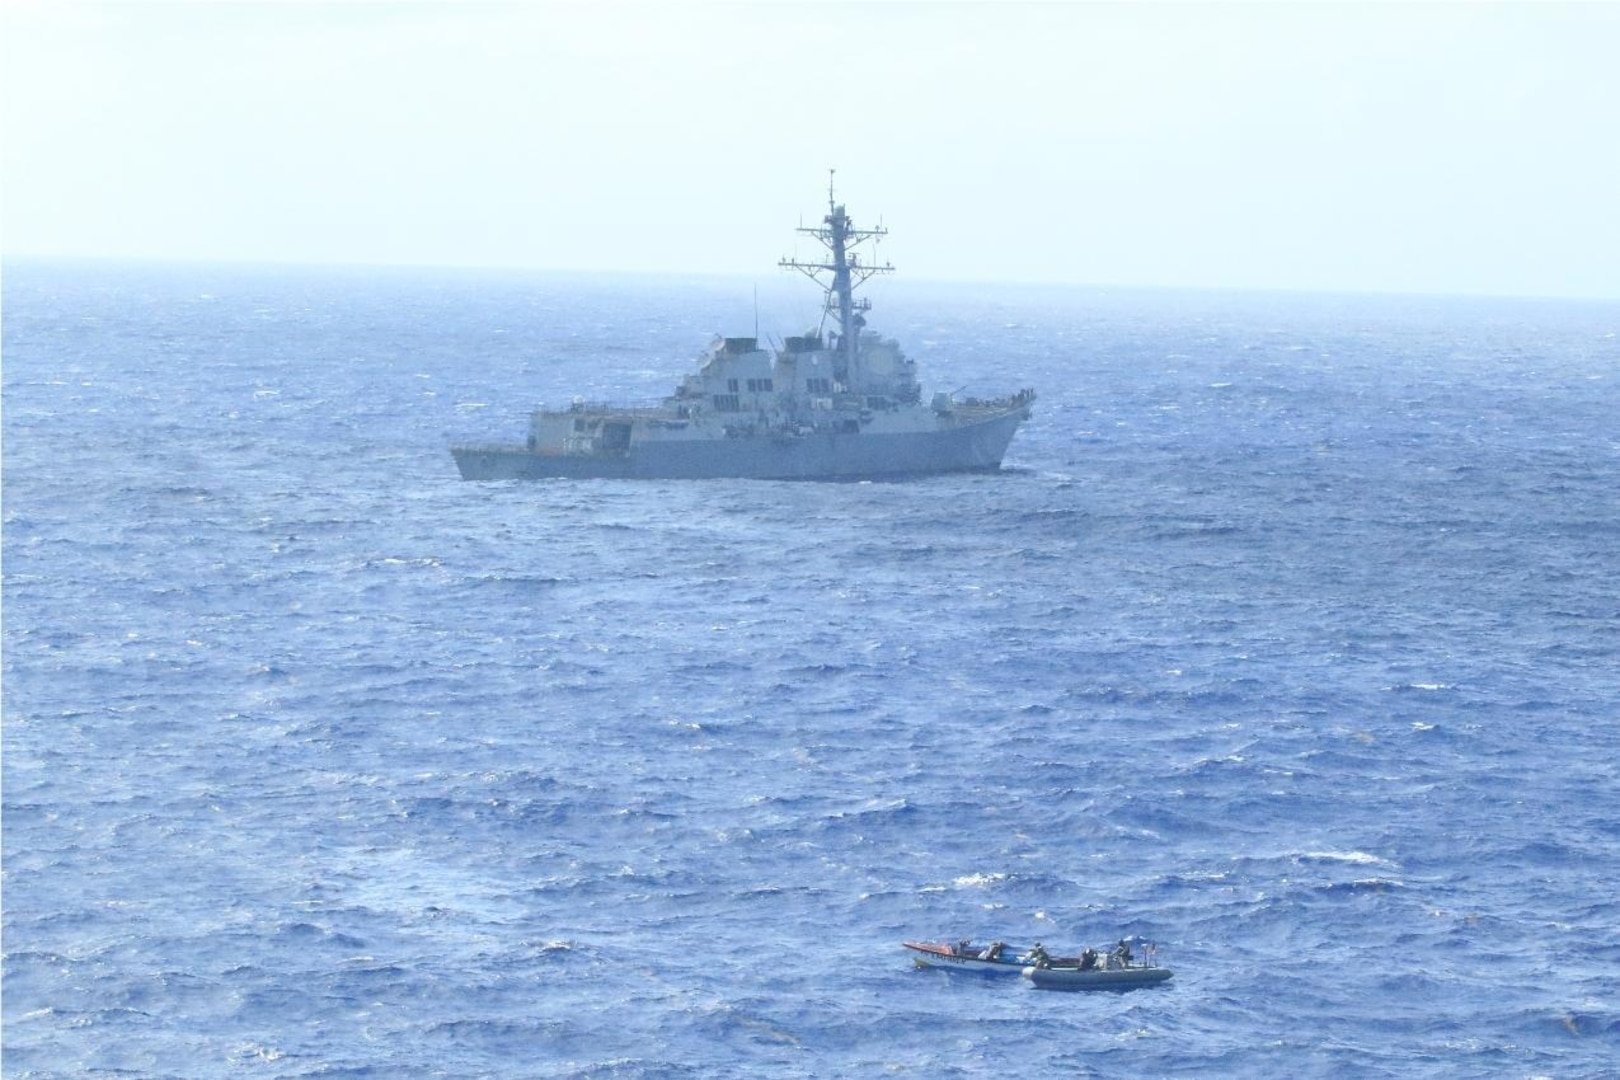 USS Lassen with embarked U.S. Coast Guard Law Enforcement Detachment team conducts enhanced counter narcotics operations in the Caribbean Sea, May 26, 2020.